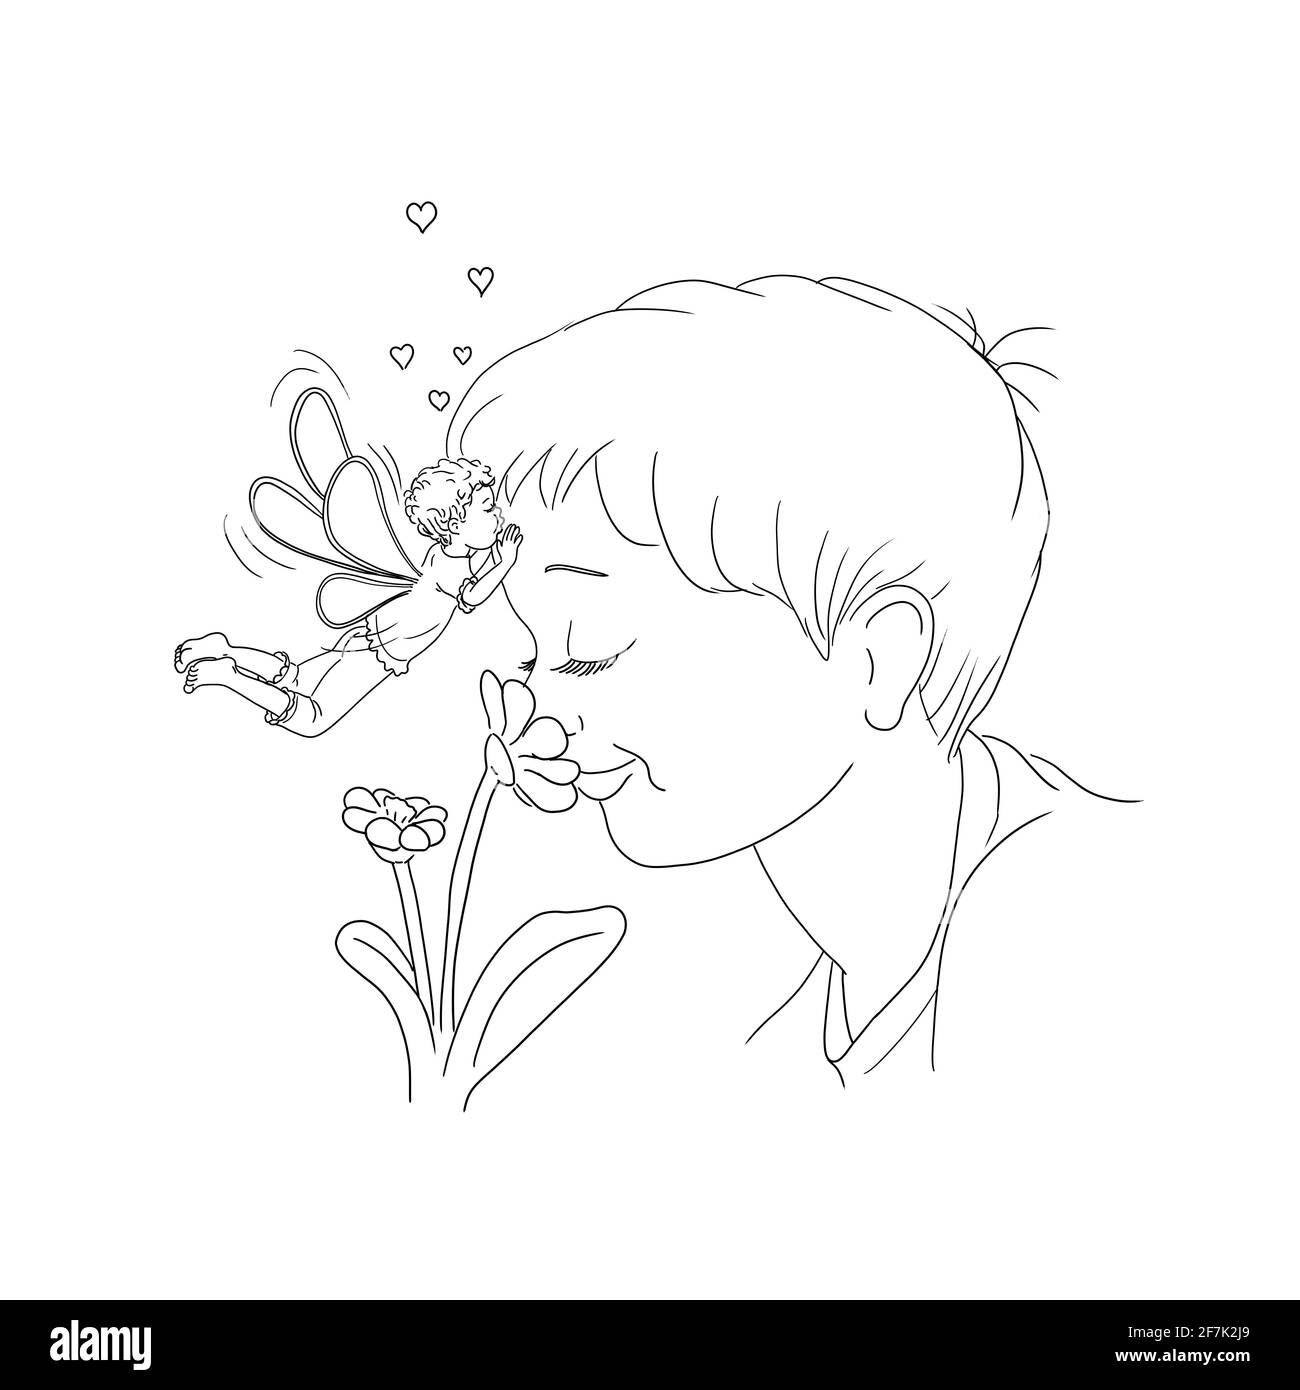 Boy child smells at flower eyes closed smiling smile laughing joy enjoy elf flies hovers and kisses him on the forehead little hearts fly love affecti Stock Photo